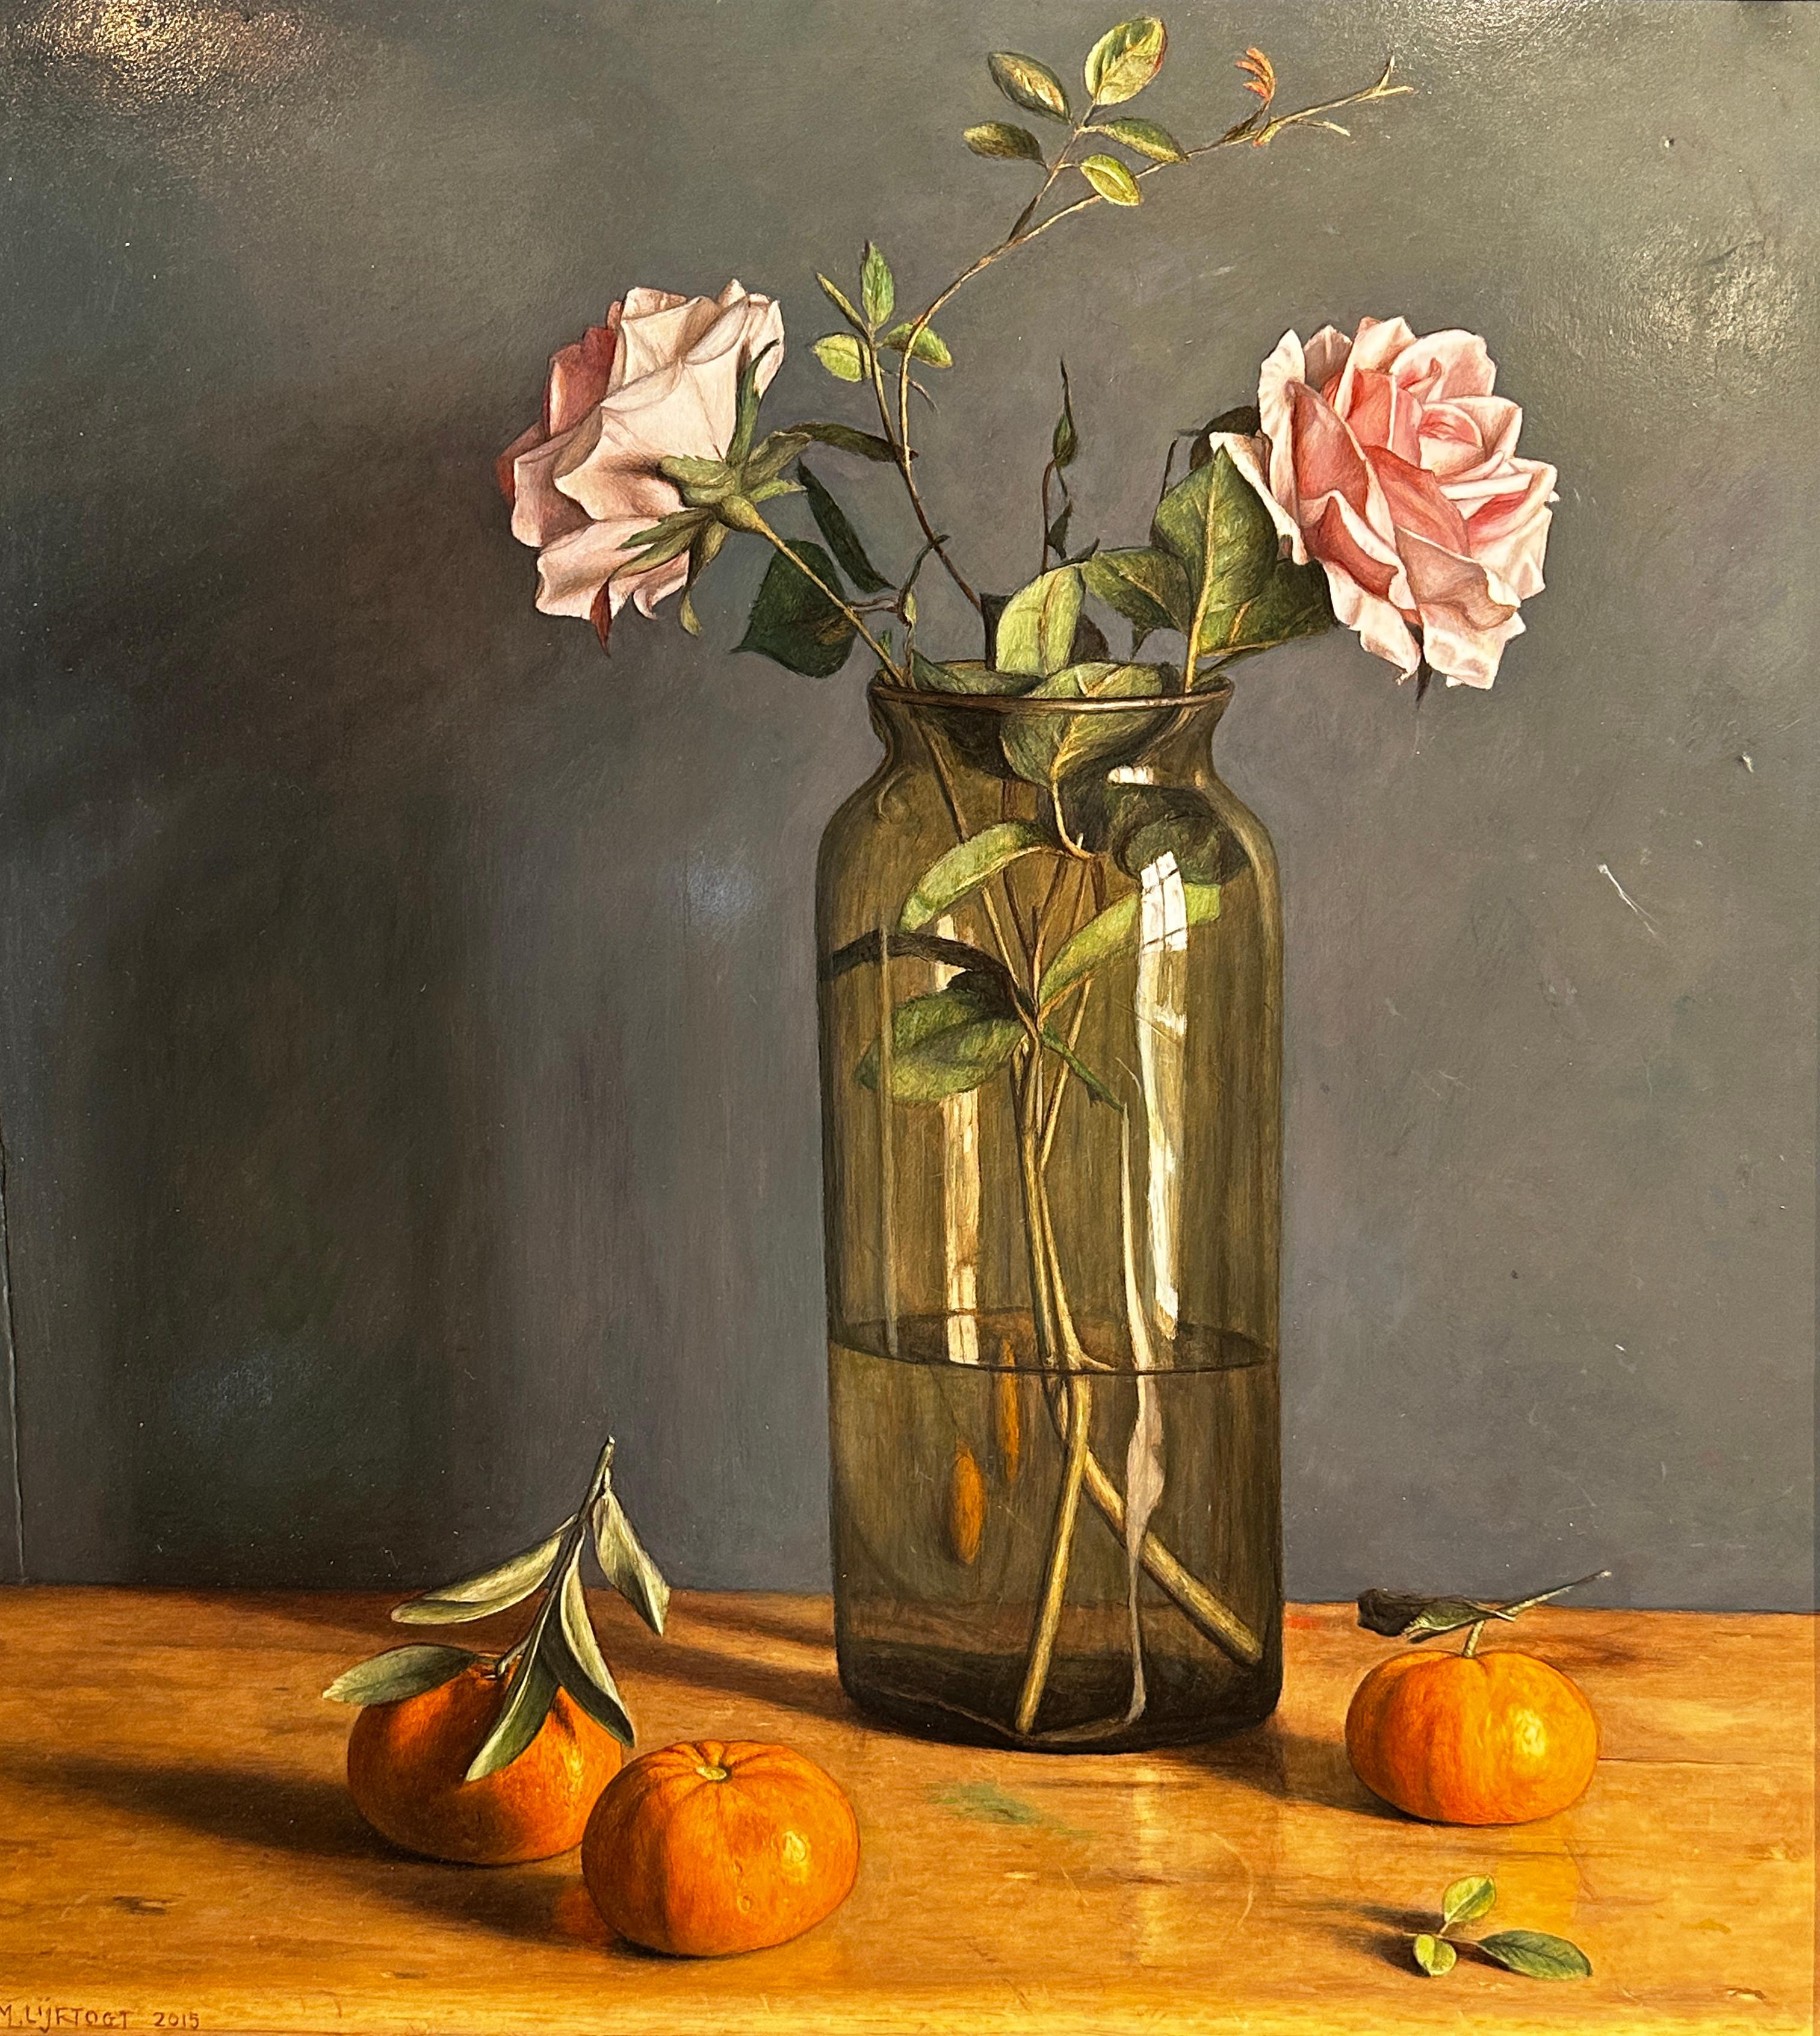 Clementine & Roses Still Life photorealist painting of vase, flowers and fruit - Painting by Mark Lijftogt